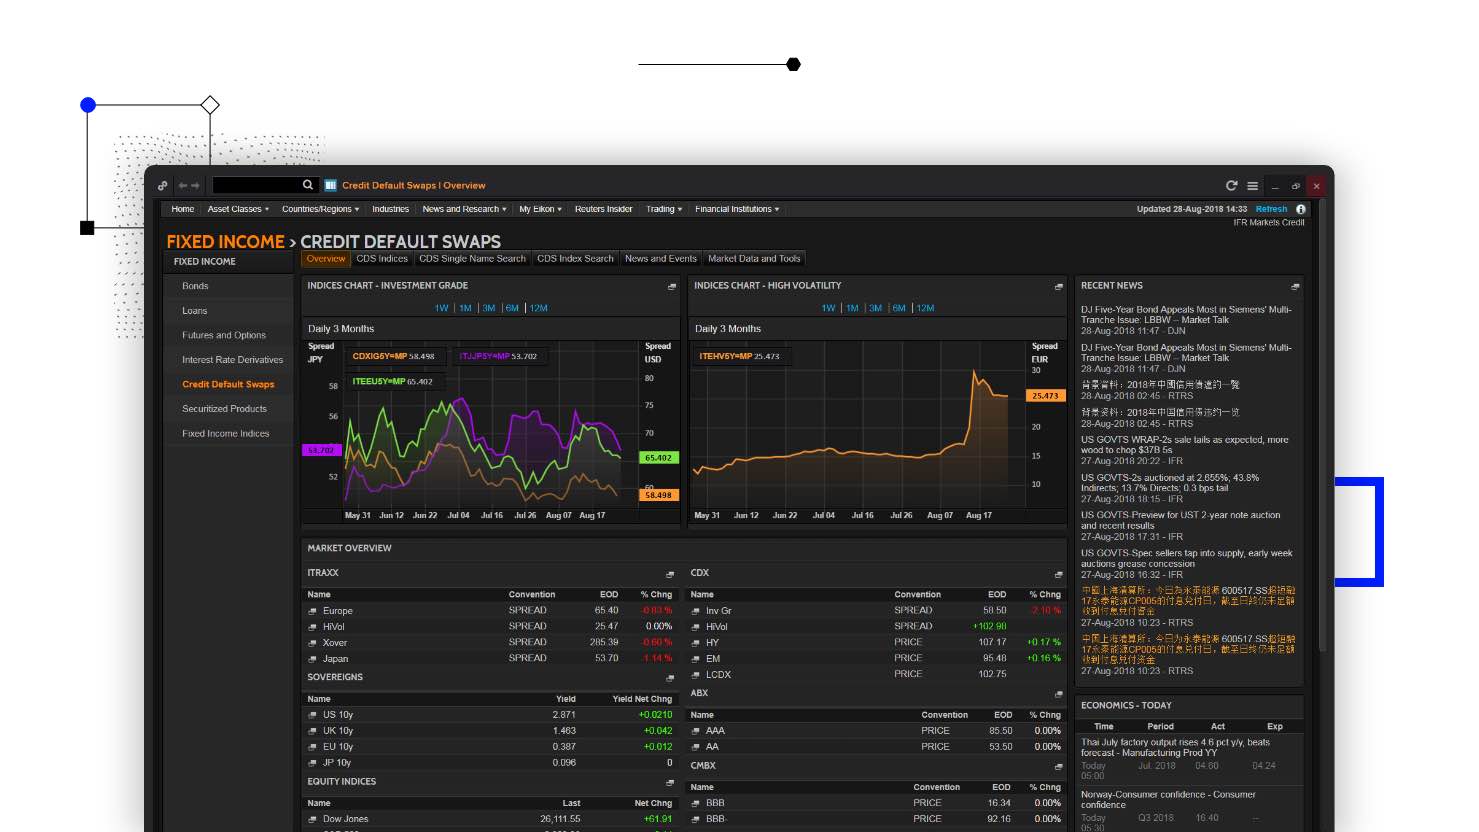 Eikon for fixed income's derivative market views provide perspective on instruments and economics